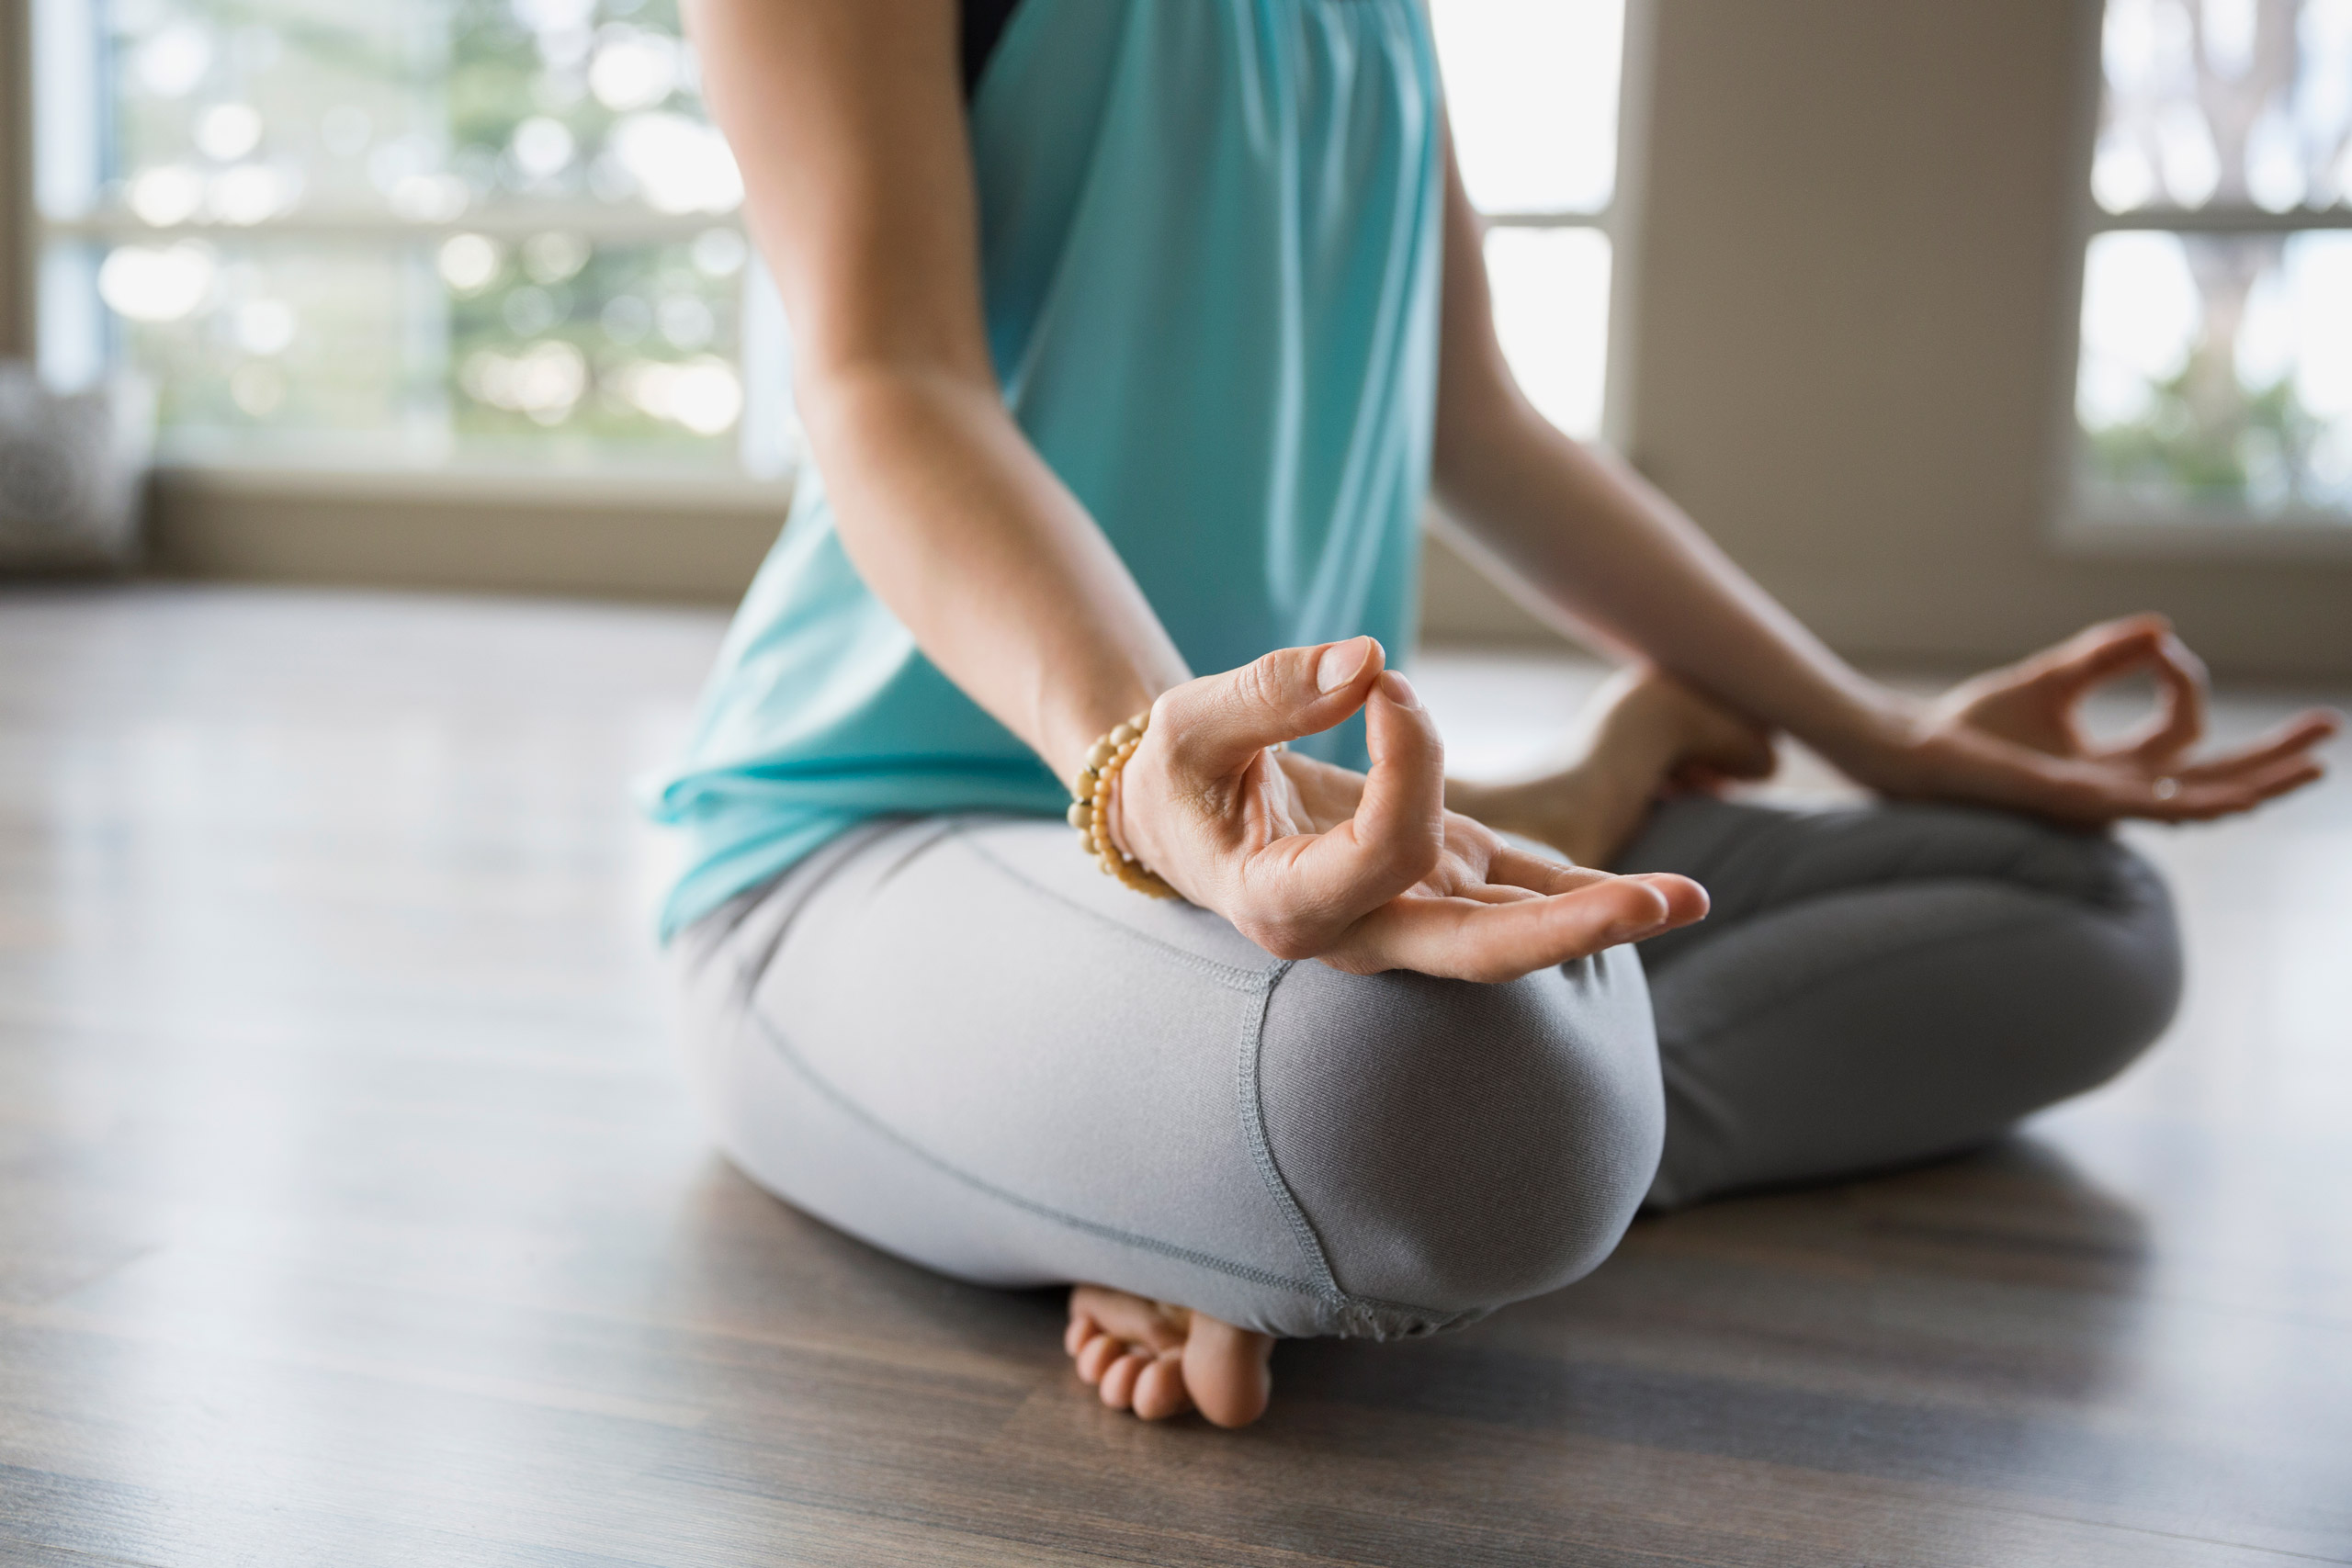 Yoga Meditation Benefits: Can You Practice at Home? | ThatSweetGift